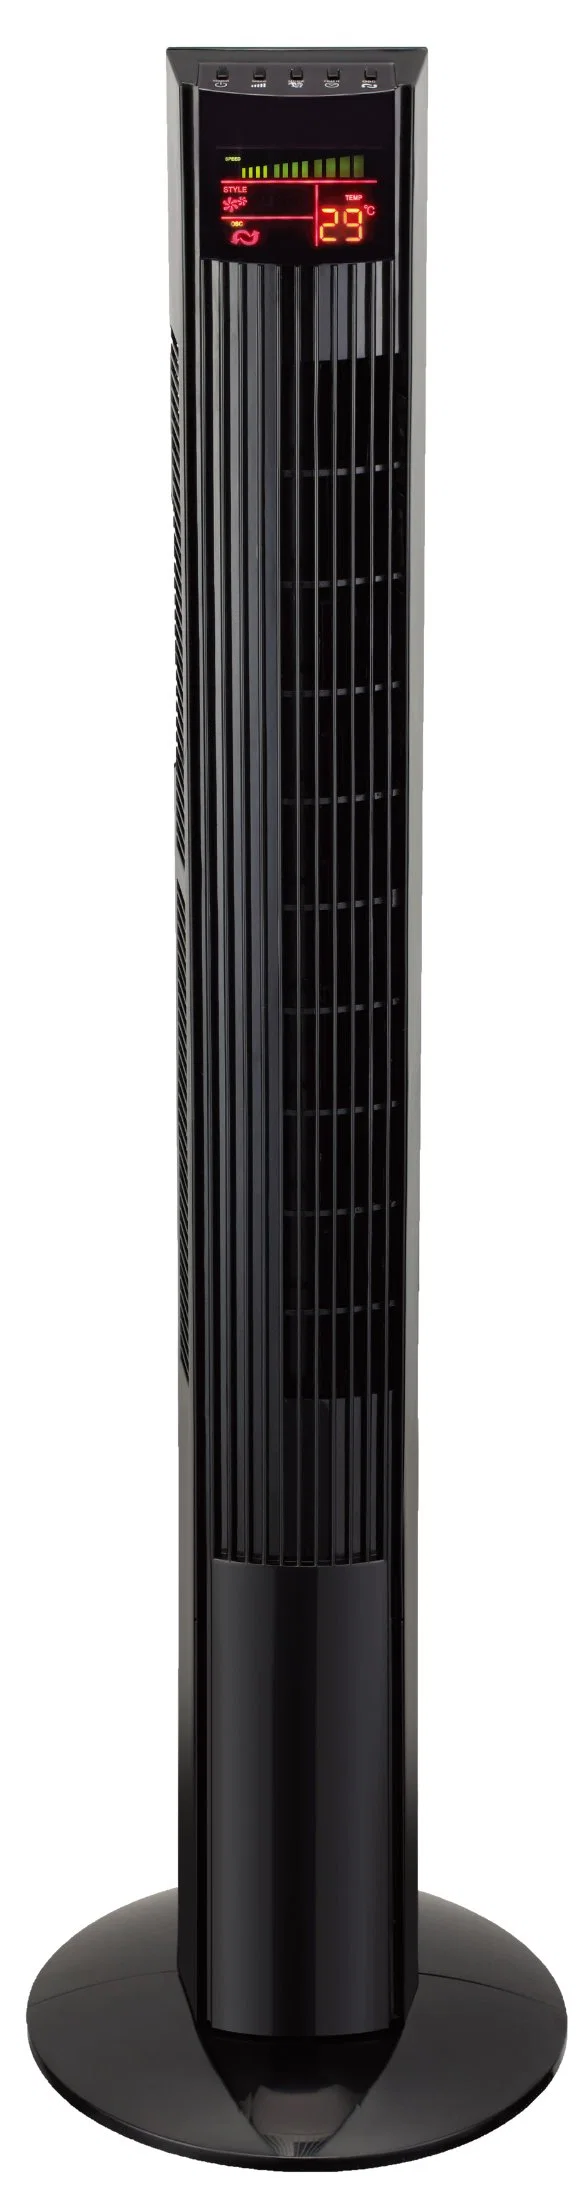 Promotion Cooling Fan 46 Inch Tower Pedestal Cooling Fan with Remote Control